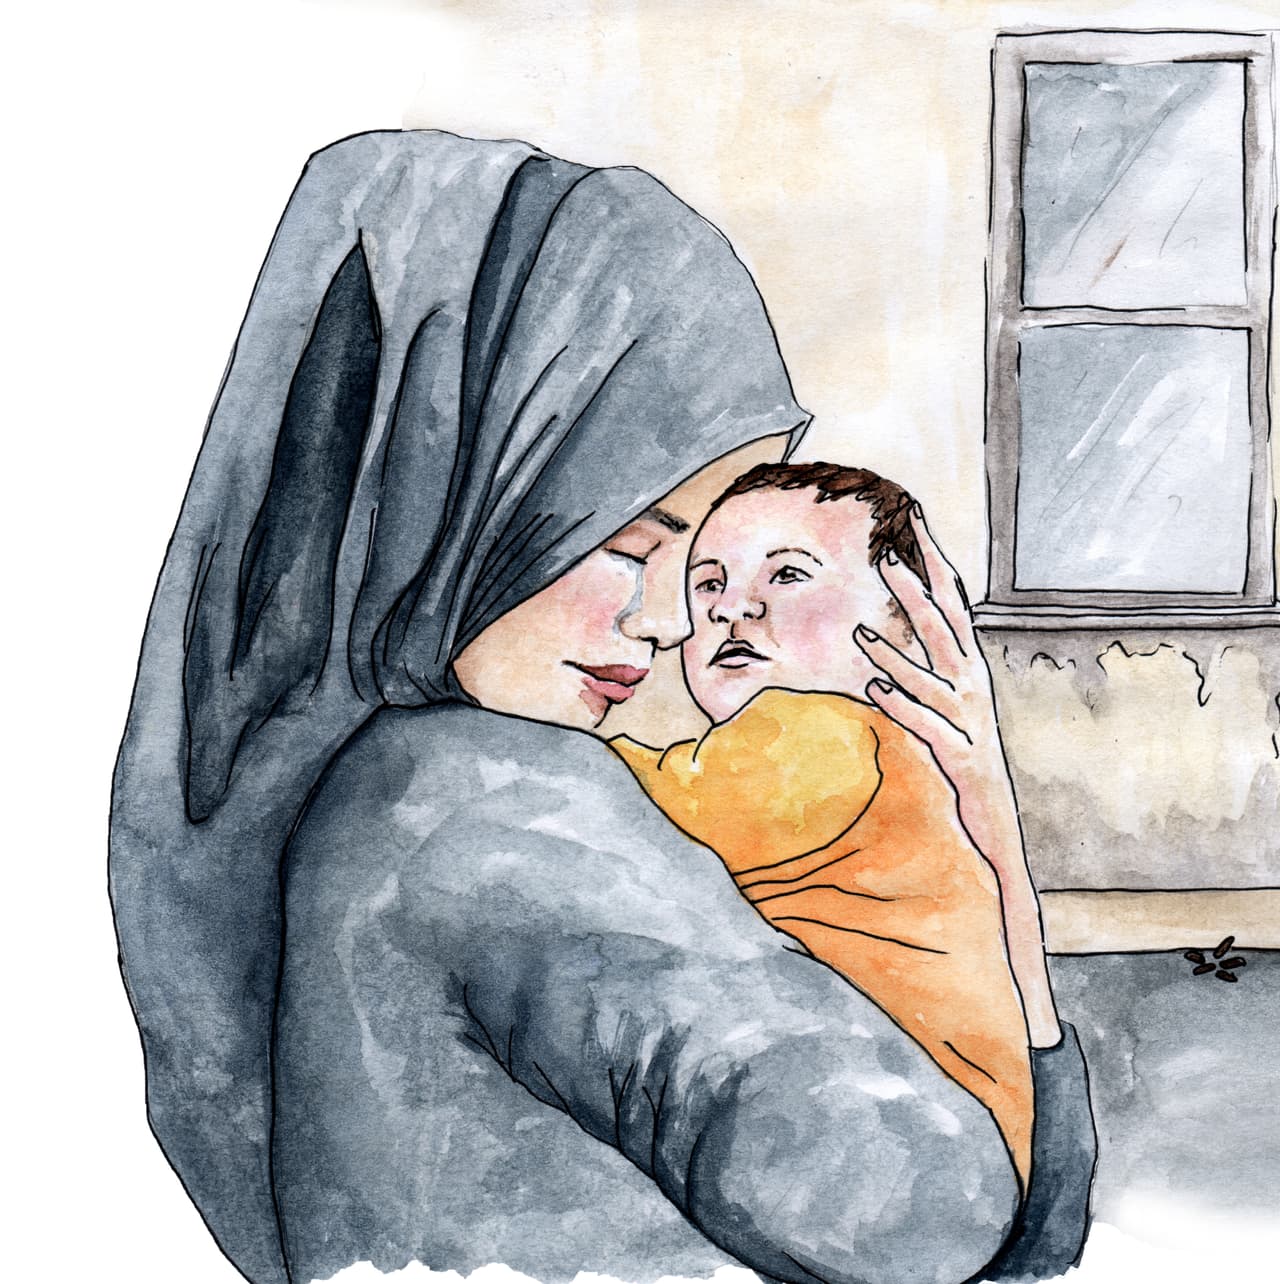 An image of a woman hugging her baby in a refuge